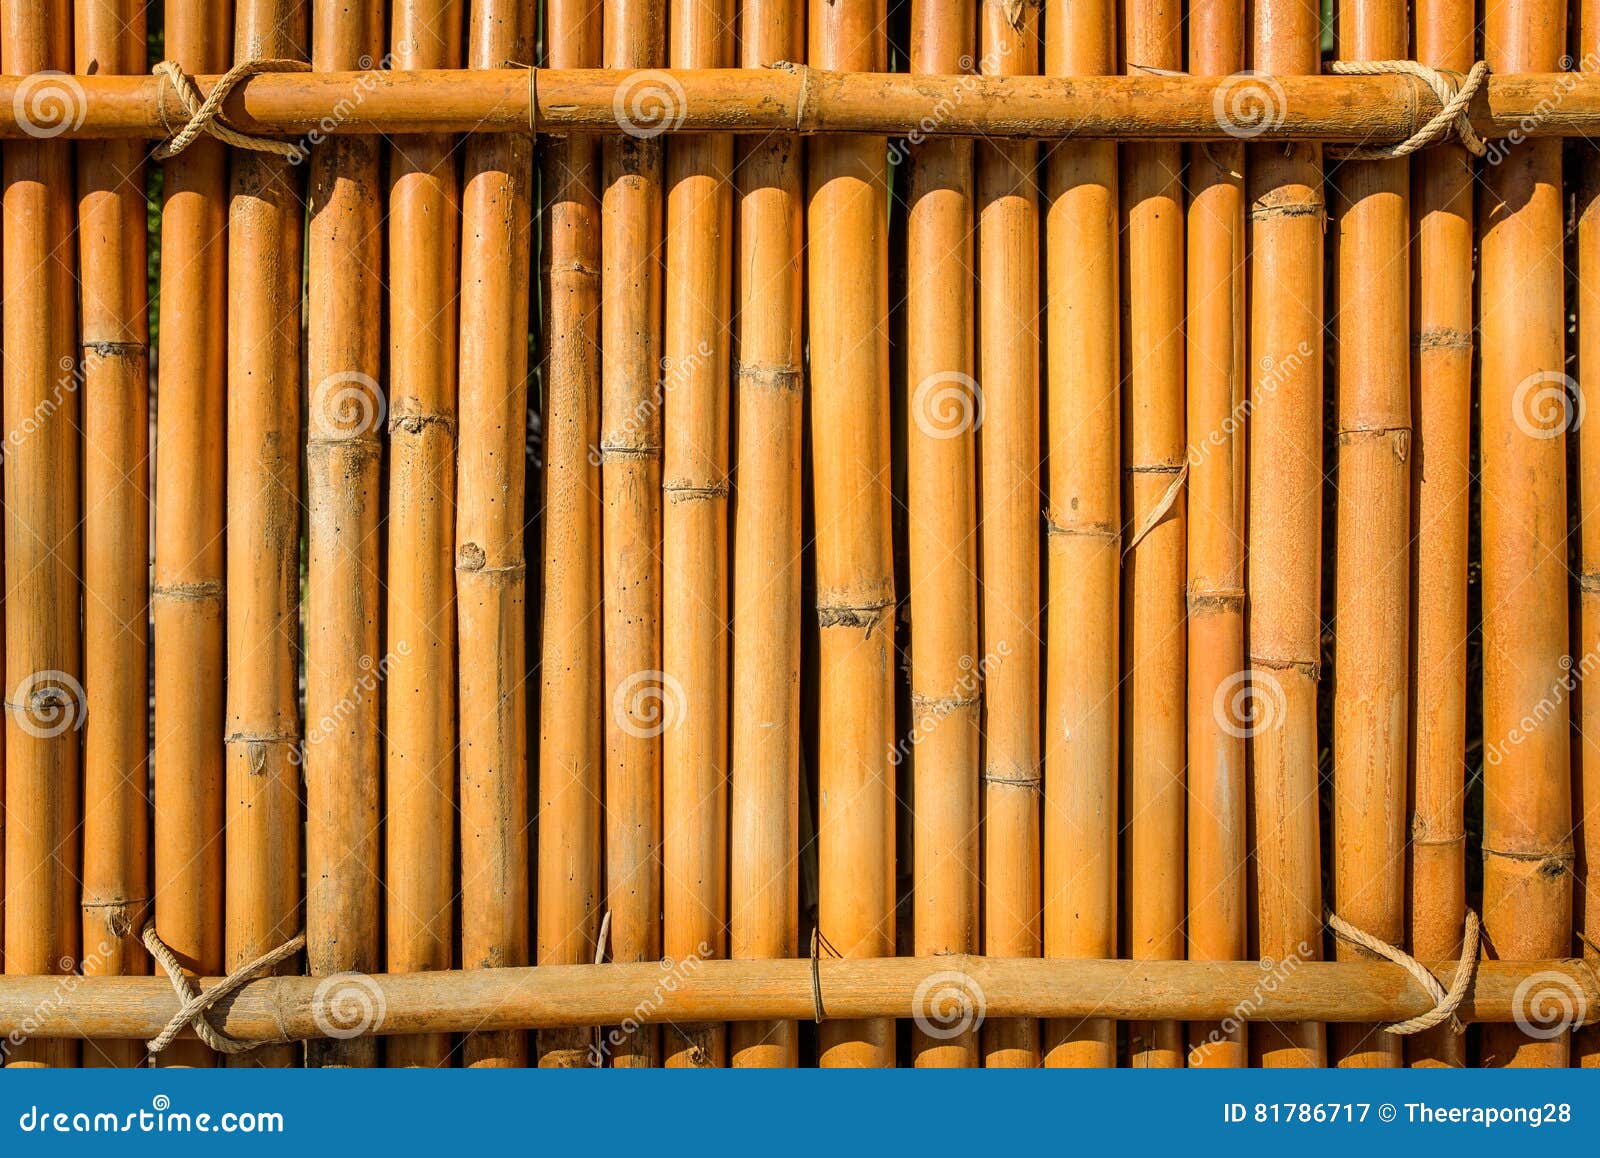 Bamboo Fence Background Texture with Rope Tide at Head Stock Image